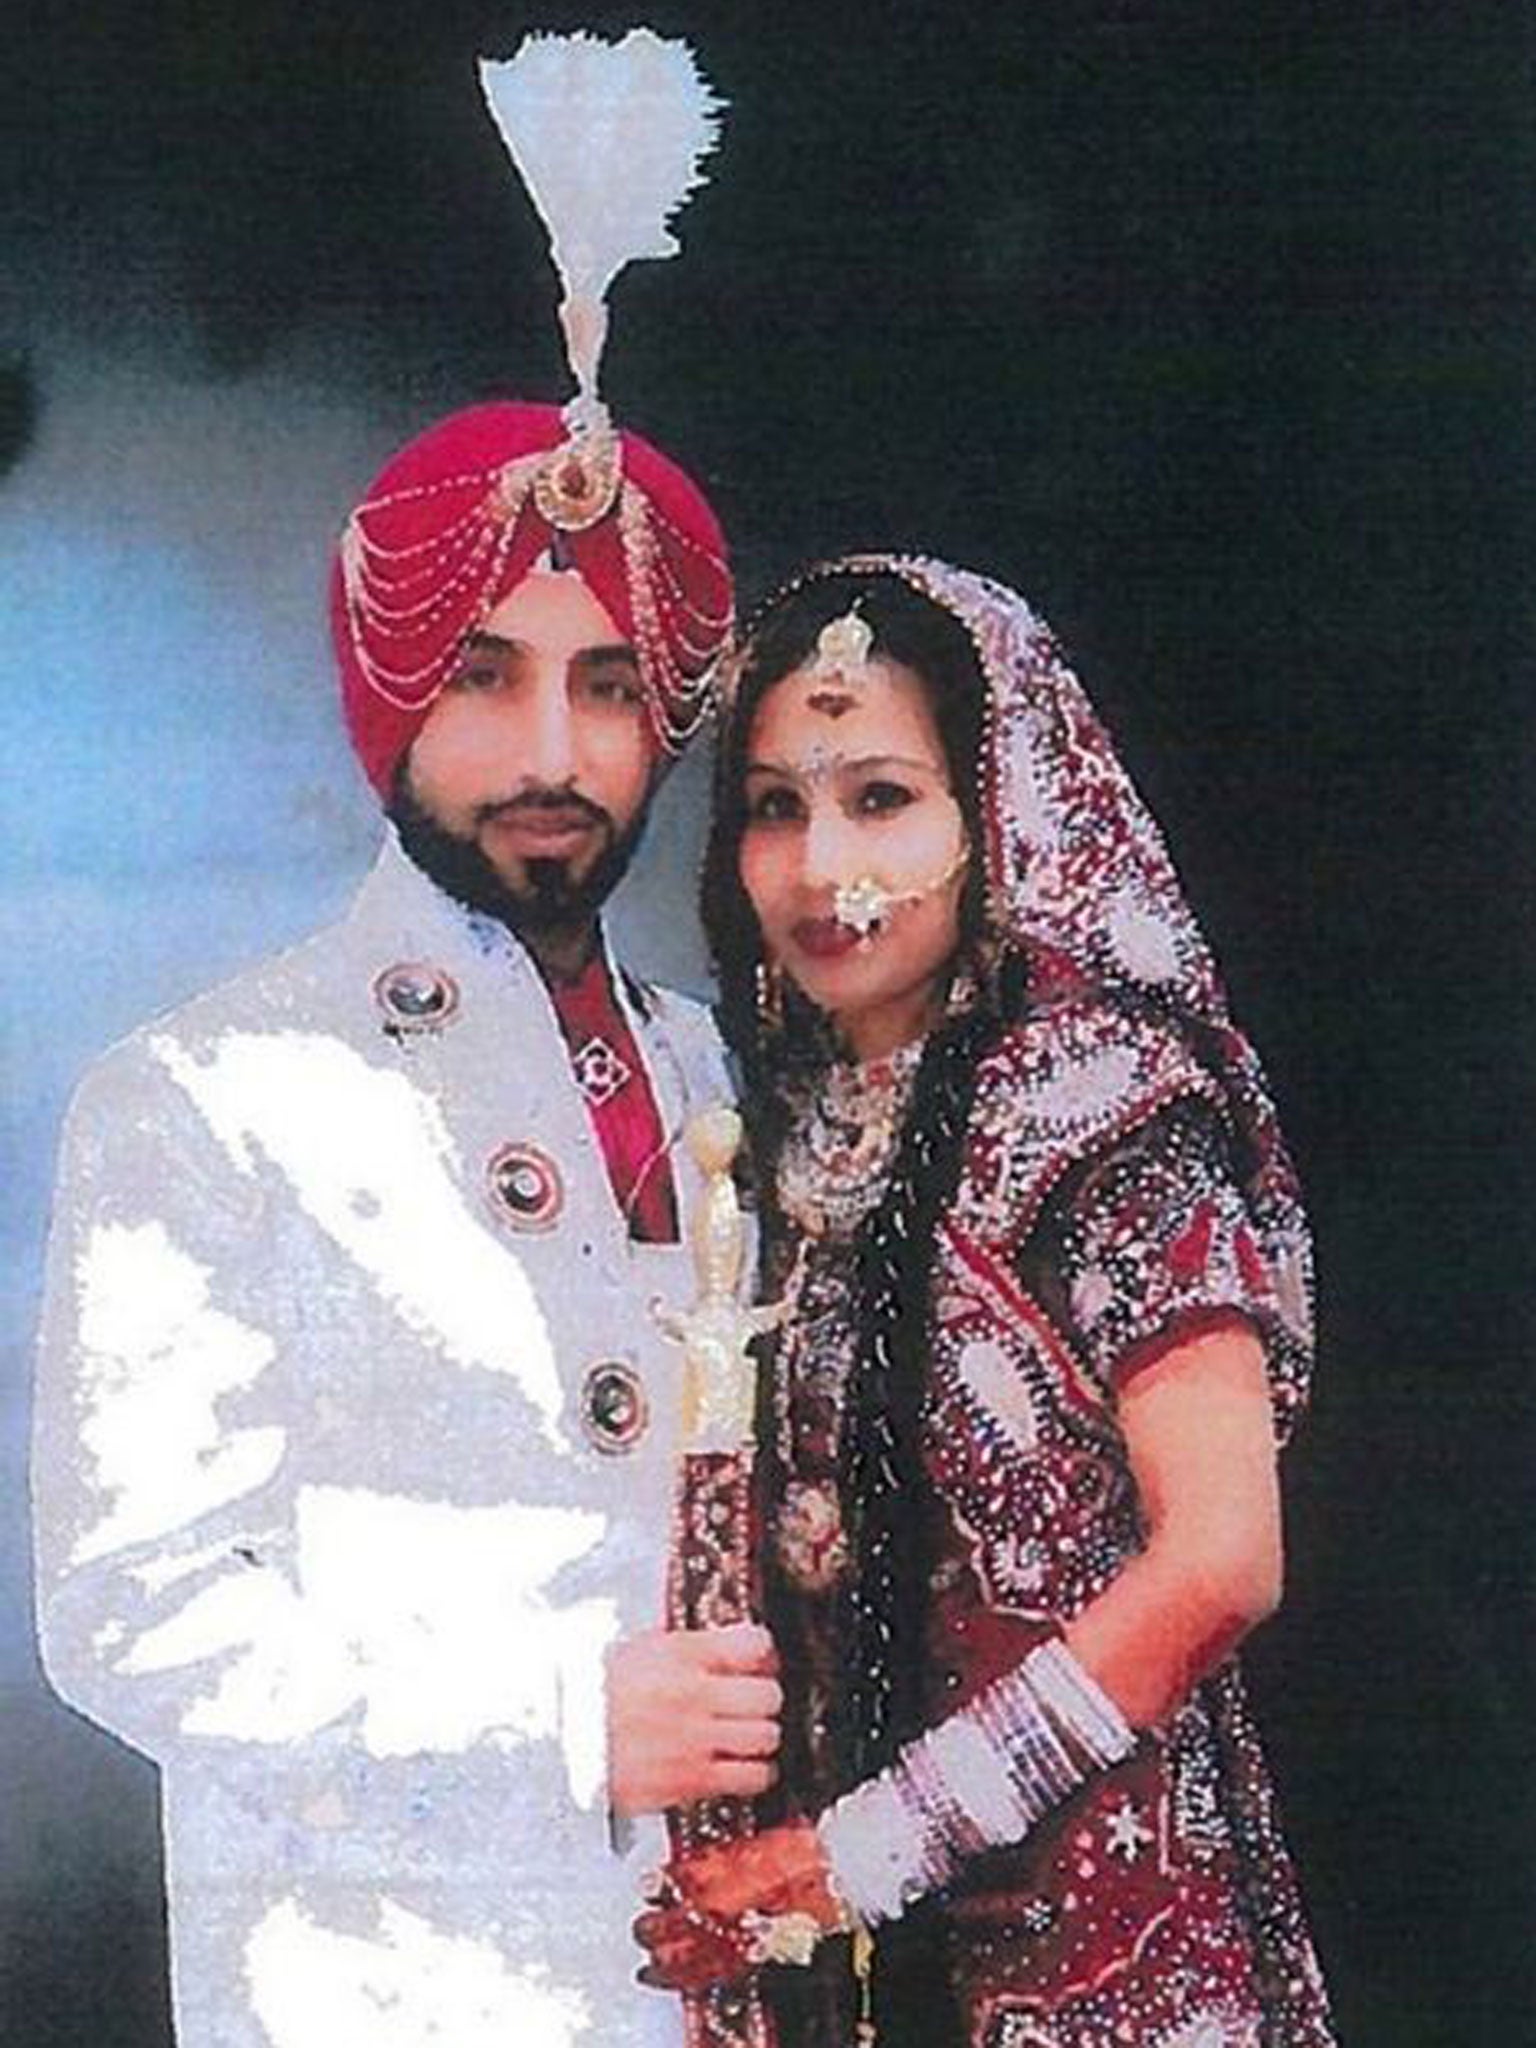 Undated handout photo issued by West Midlands Police of Jasvir Ginday, 29, with his wife Varkha Rani, 24, on their wedding day, after gay bank worker Jasvir Ginday, 29, was convicted of murdering his wife before burning her body just months after they tie